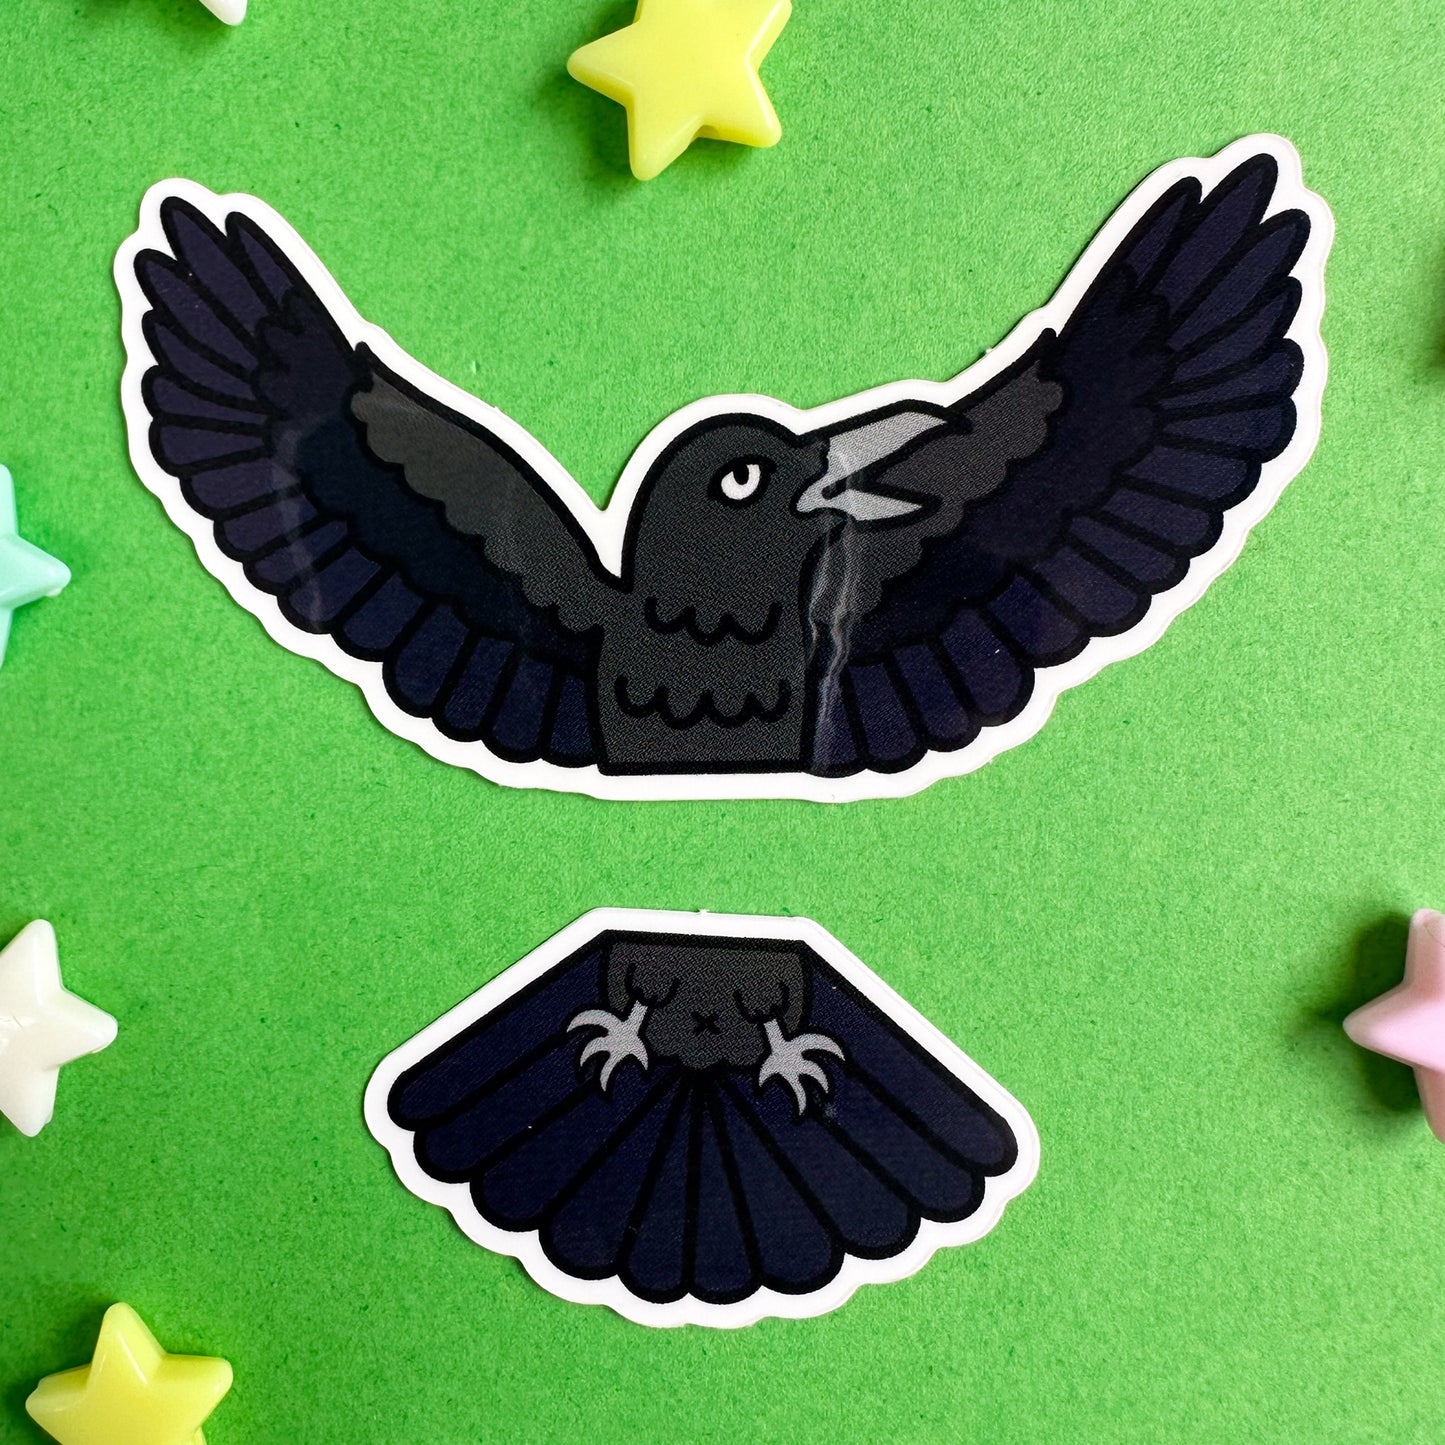 Two vinyl stickers that form a raven cut in half horizontally. The stickers are on a green paper background with star beads around them. 